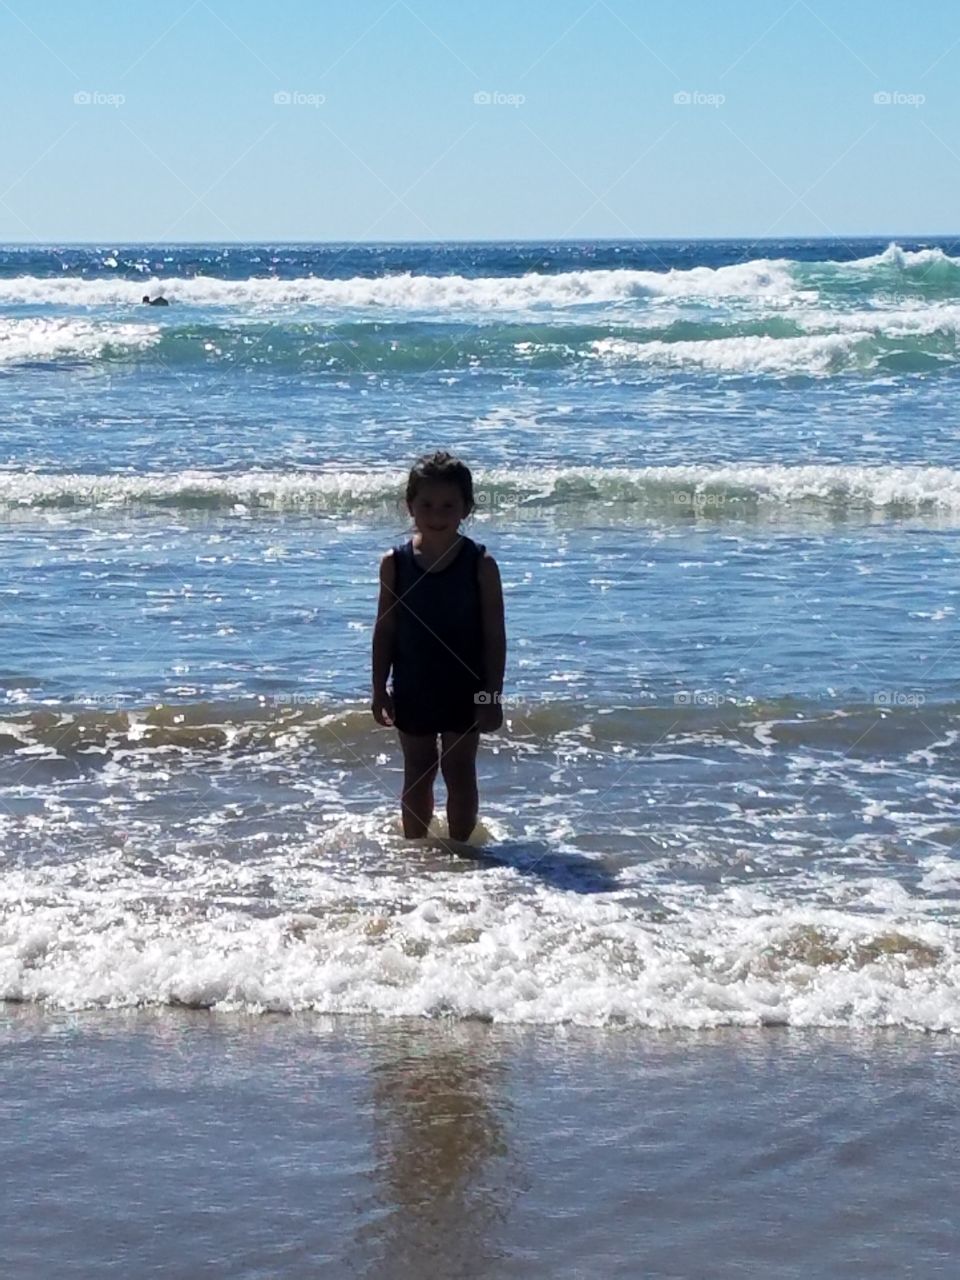 Little girl's silhouette contrasts against sparkling Pacific Ocean.